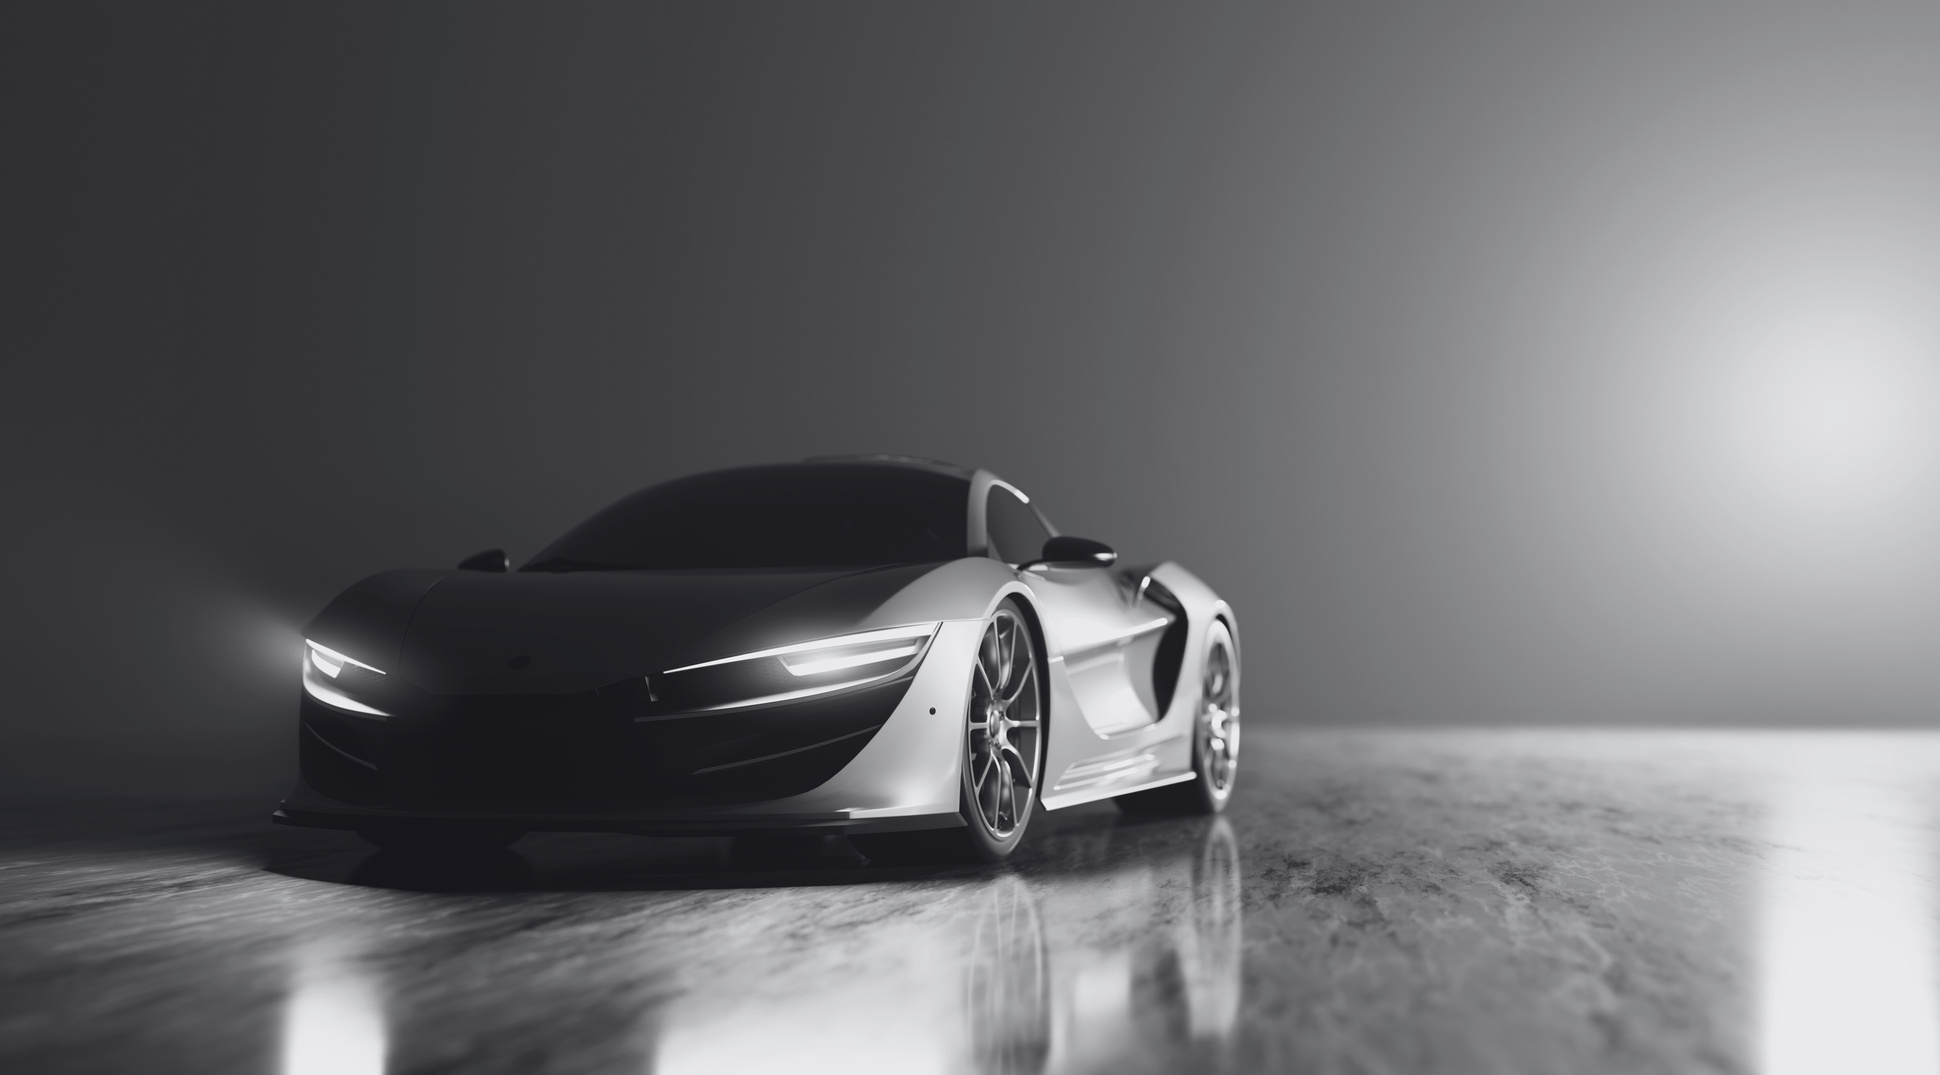 a black and white image of a sports car